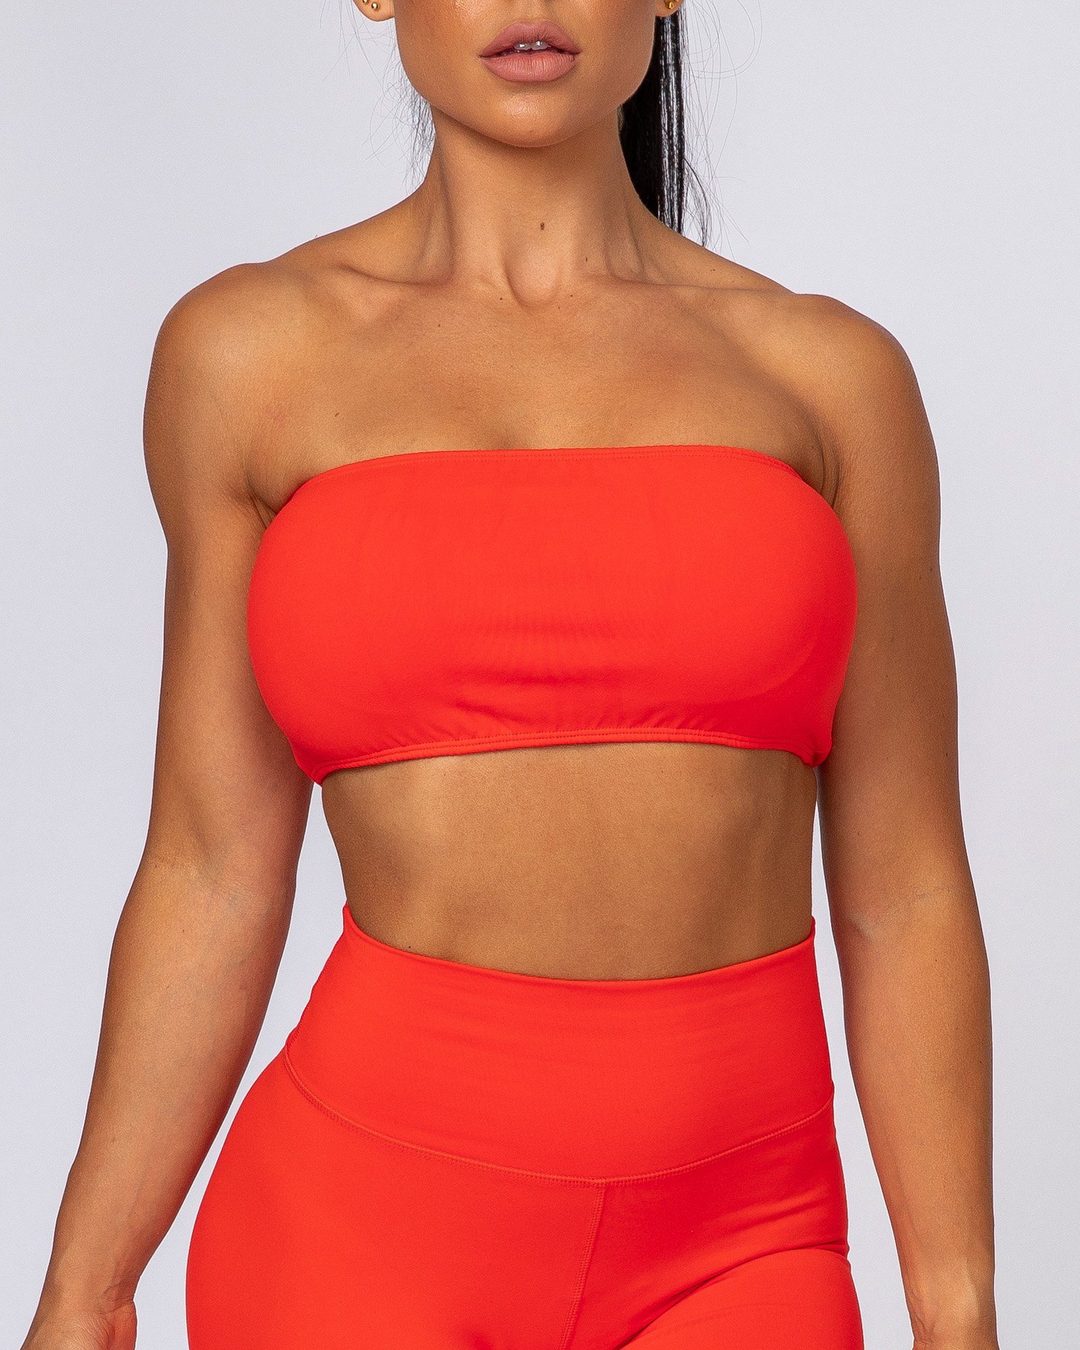 musclenation Bandeau - Infrared